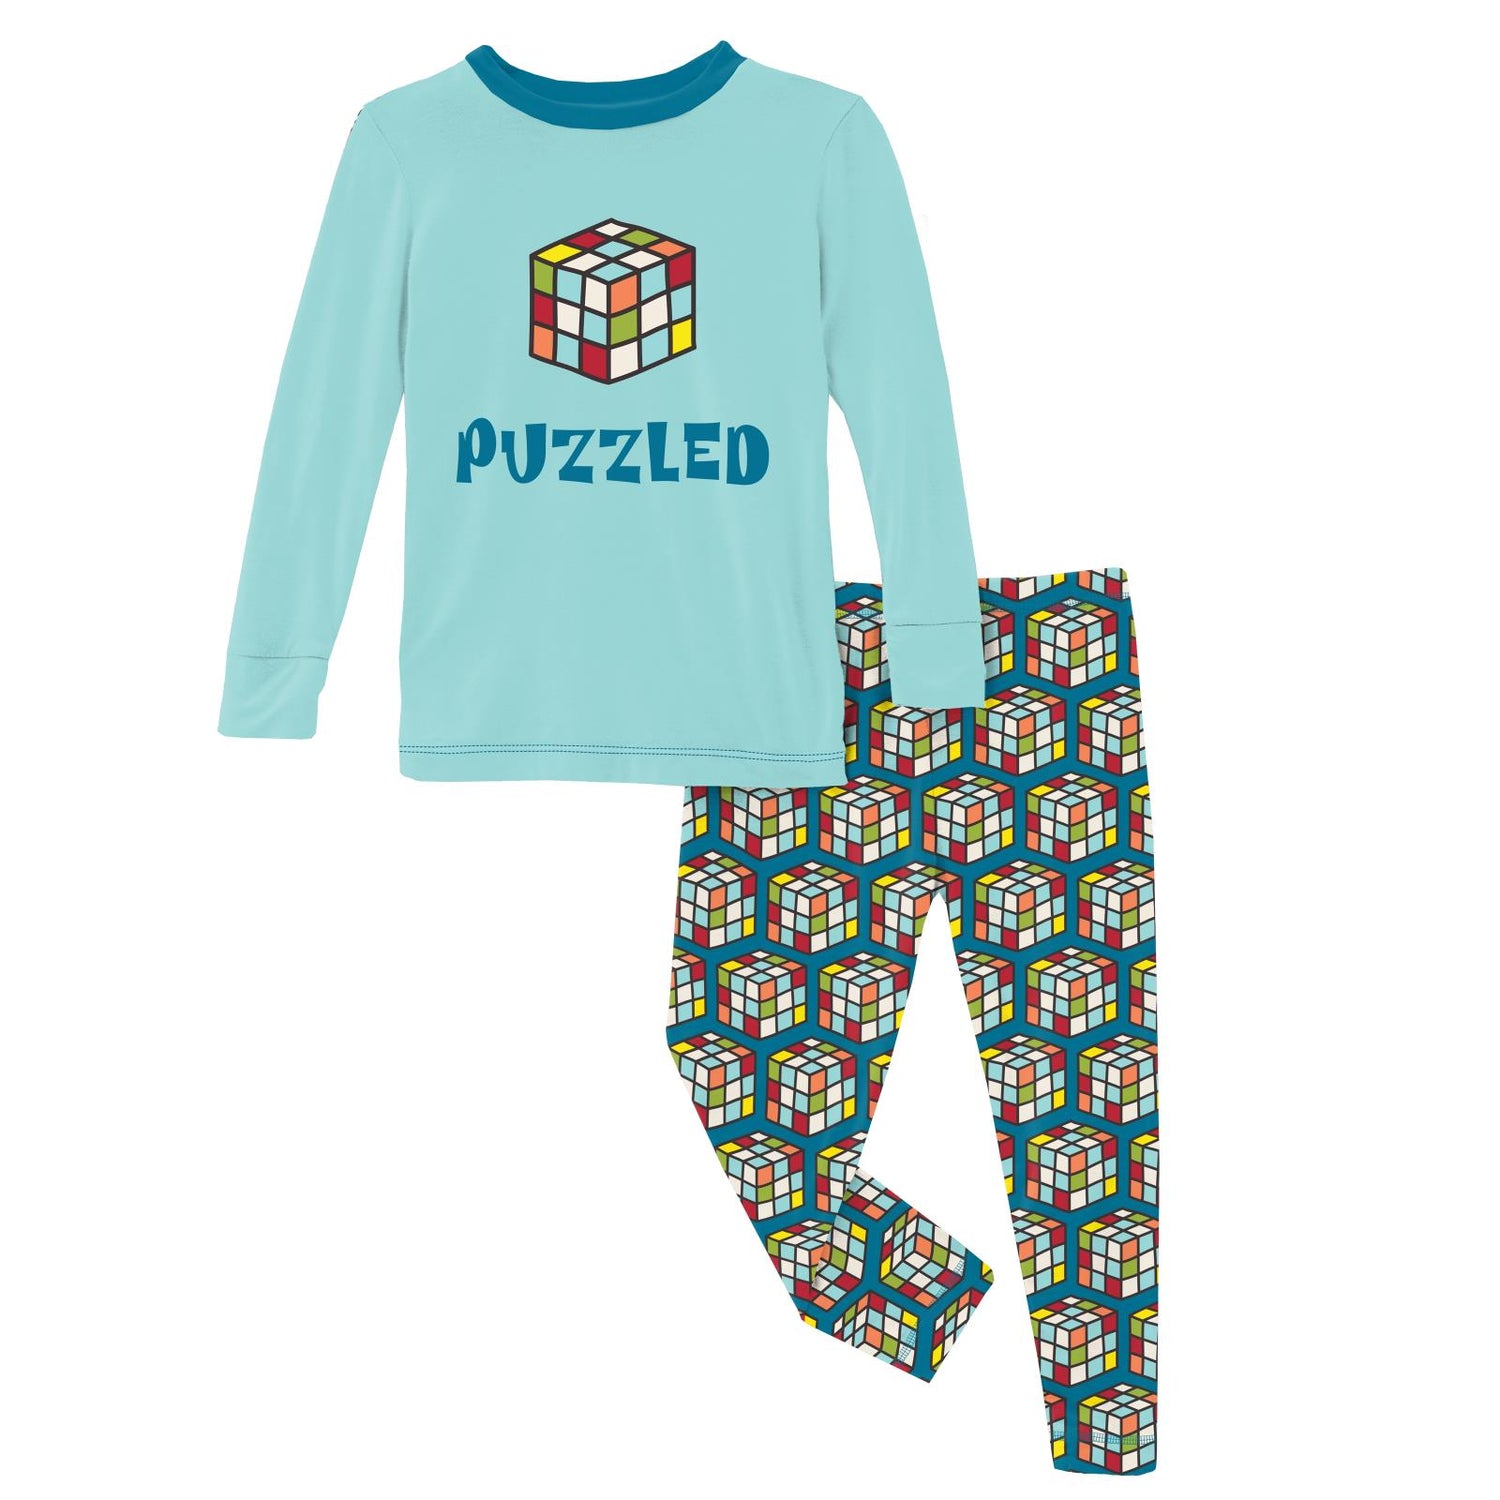 Long Sleeve Graphic Tee Pajama Set in Cerulean Blue Puzzle Cube